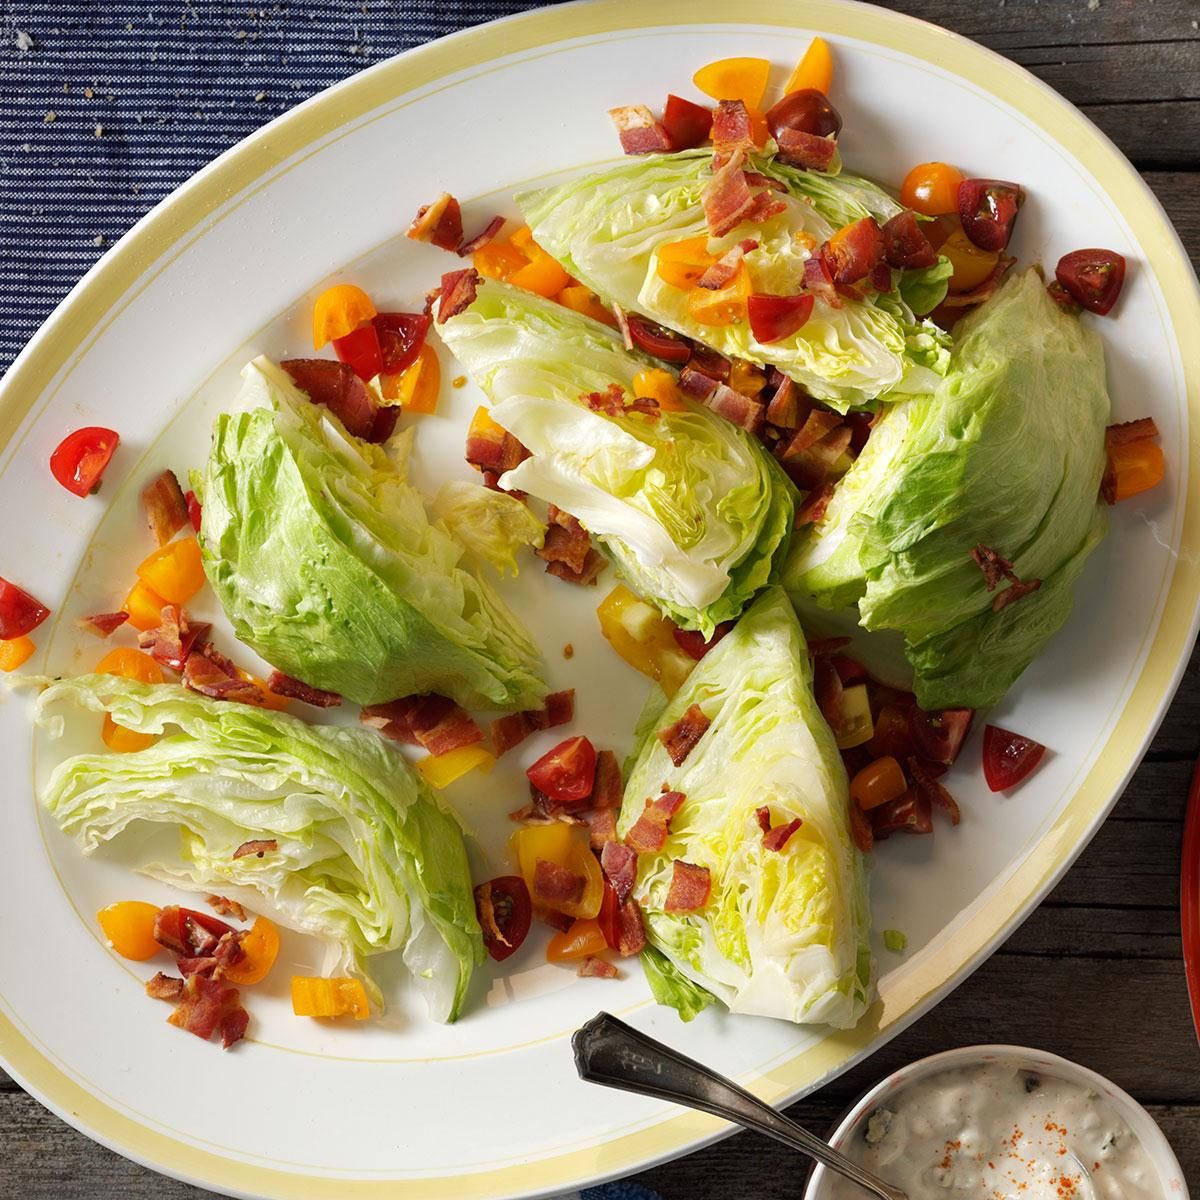 Inspired by: Tay's Wedge Salad